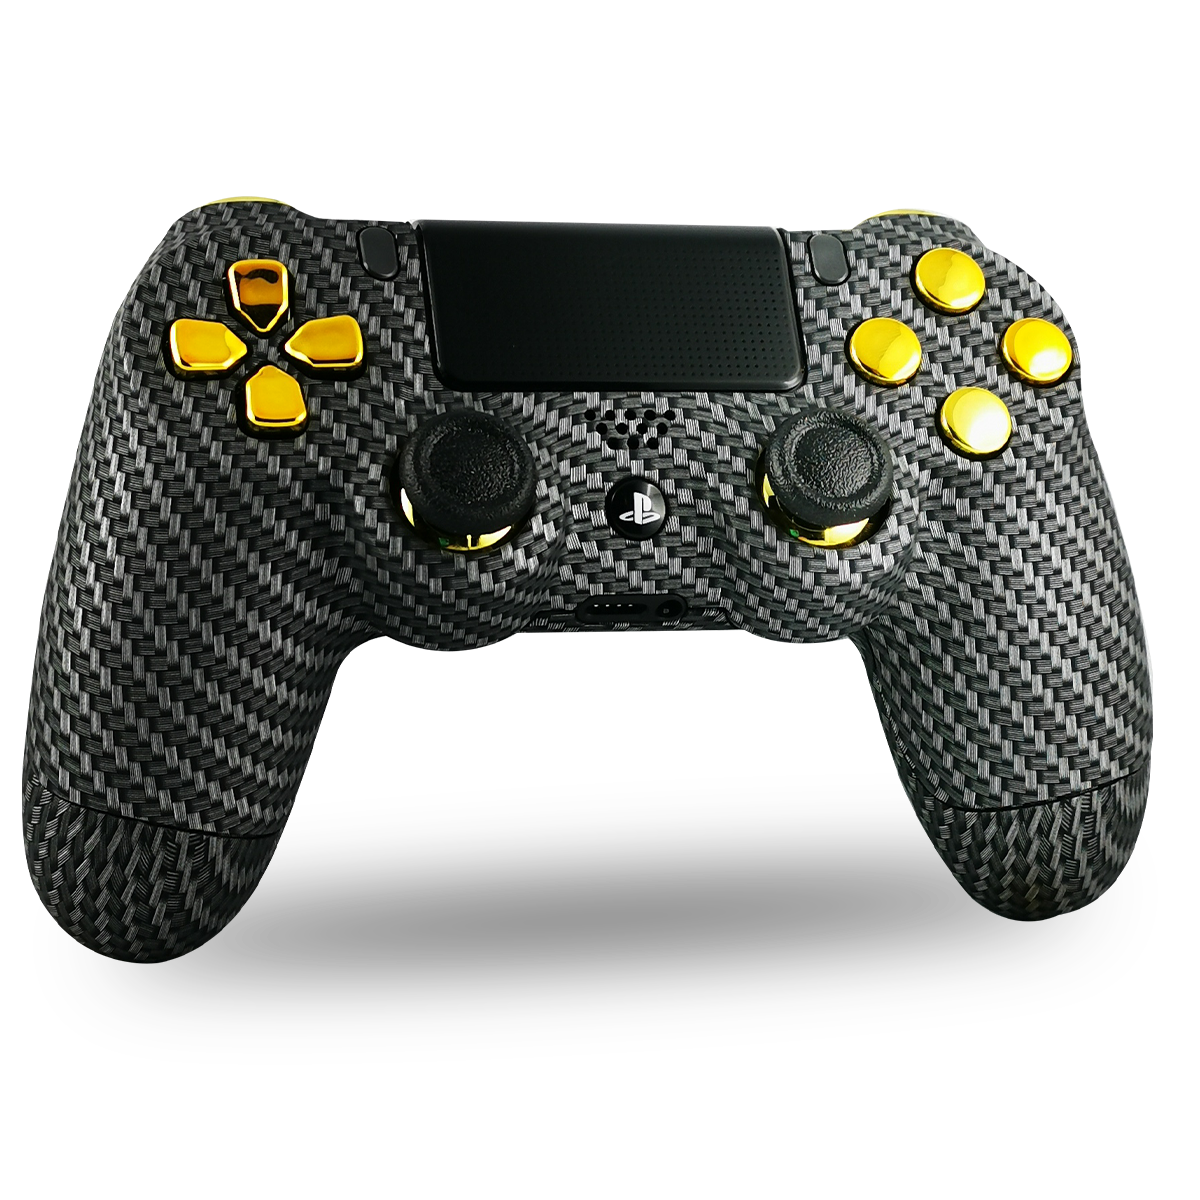 manette-PS4-custom-playstation-4-sony-personnalisee-drawmypad-need-for-speed